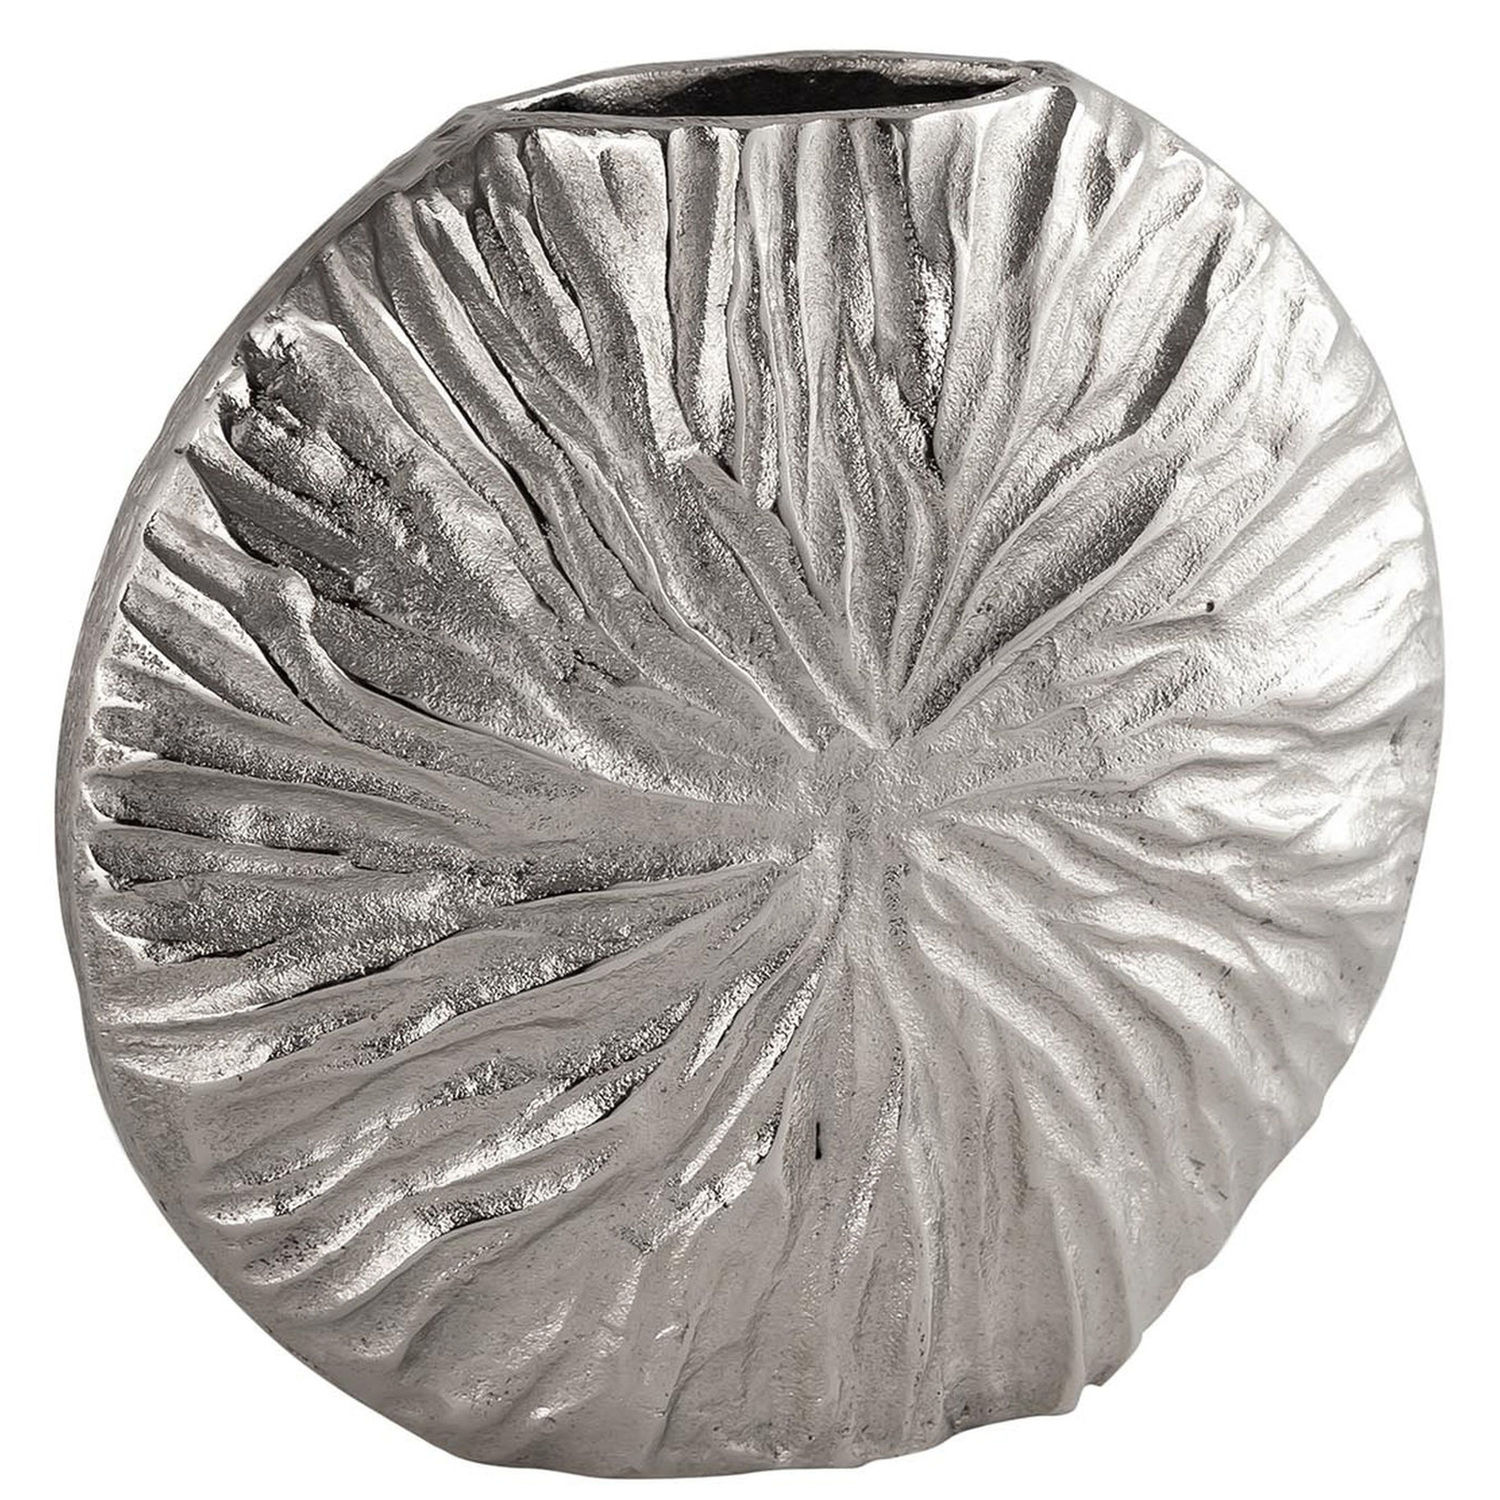 Farrah Collection Silver Textured Large Vase - Image 1